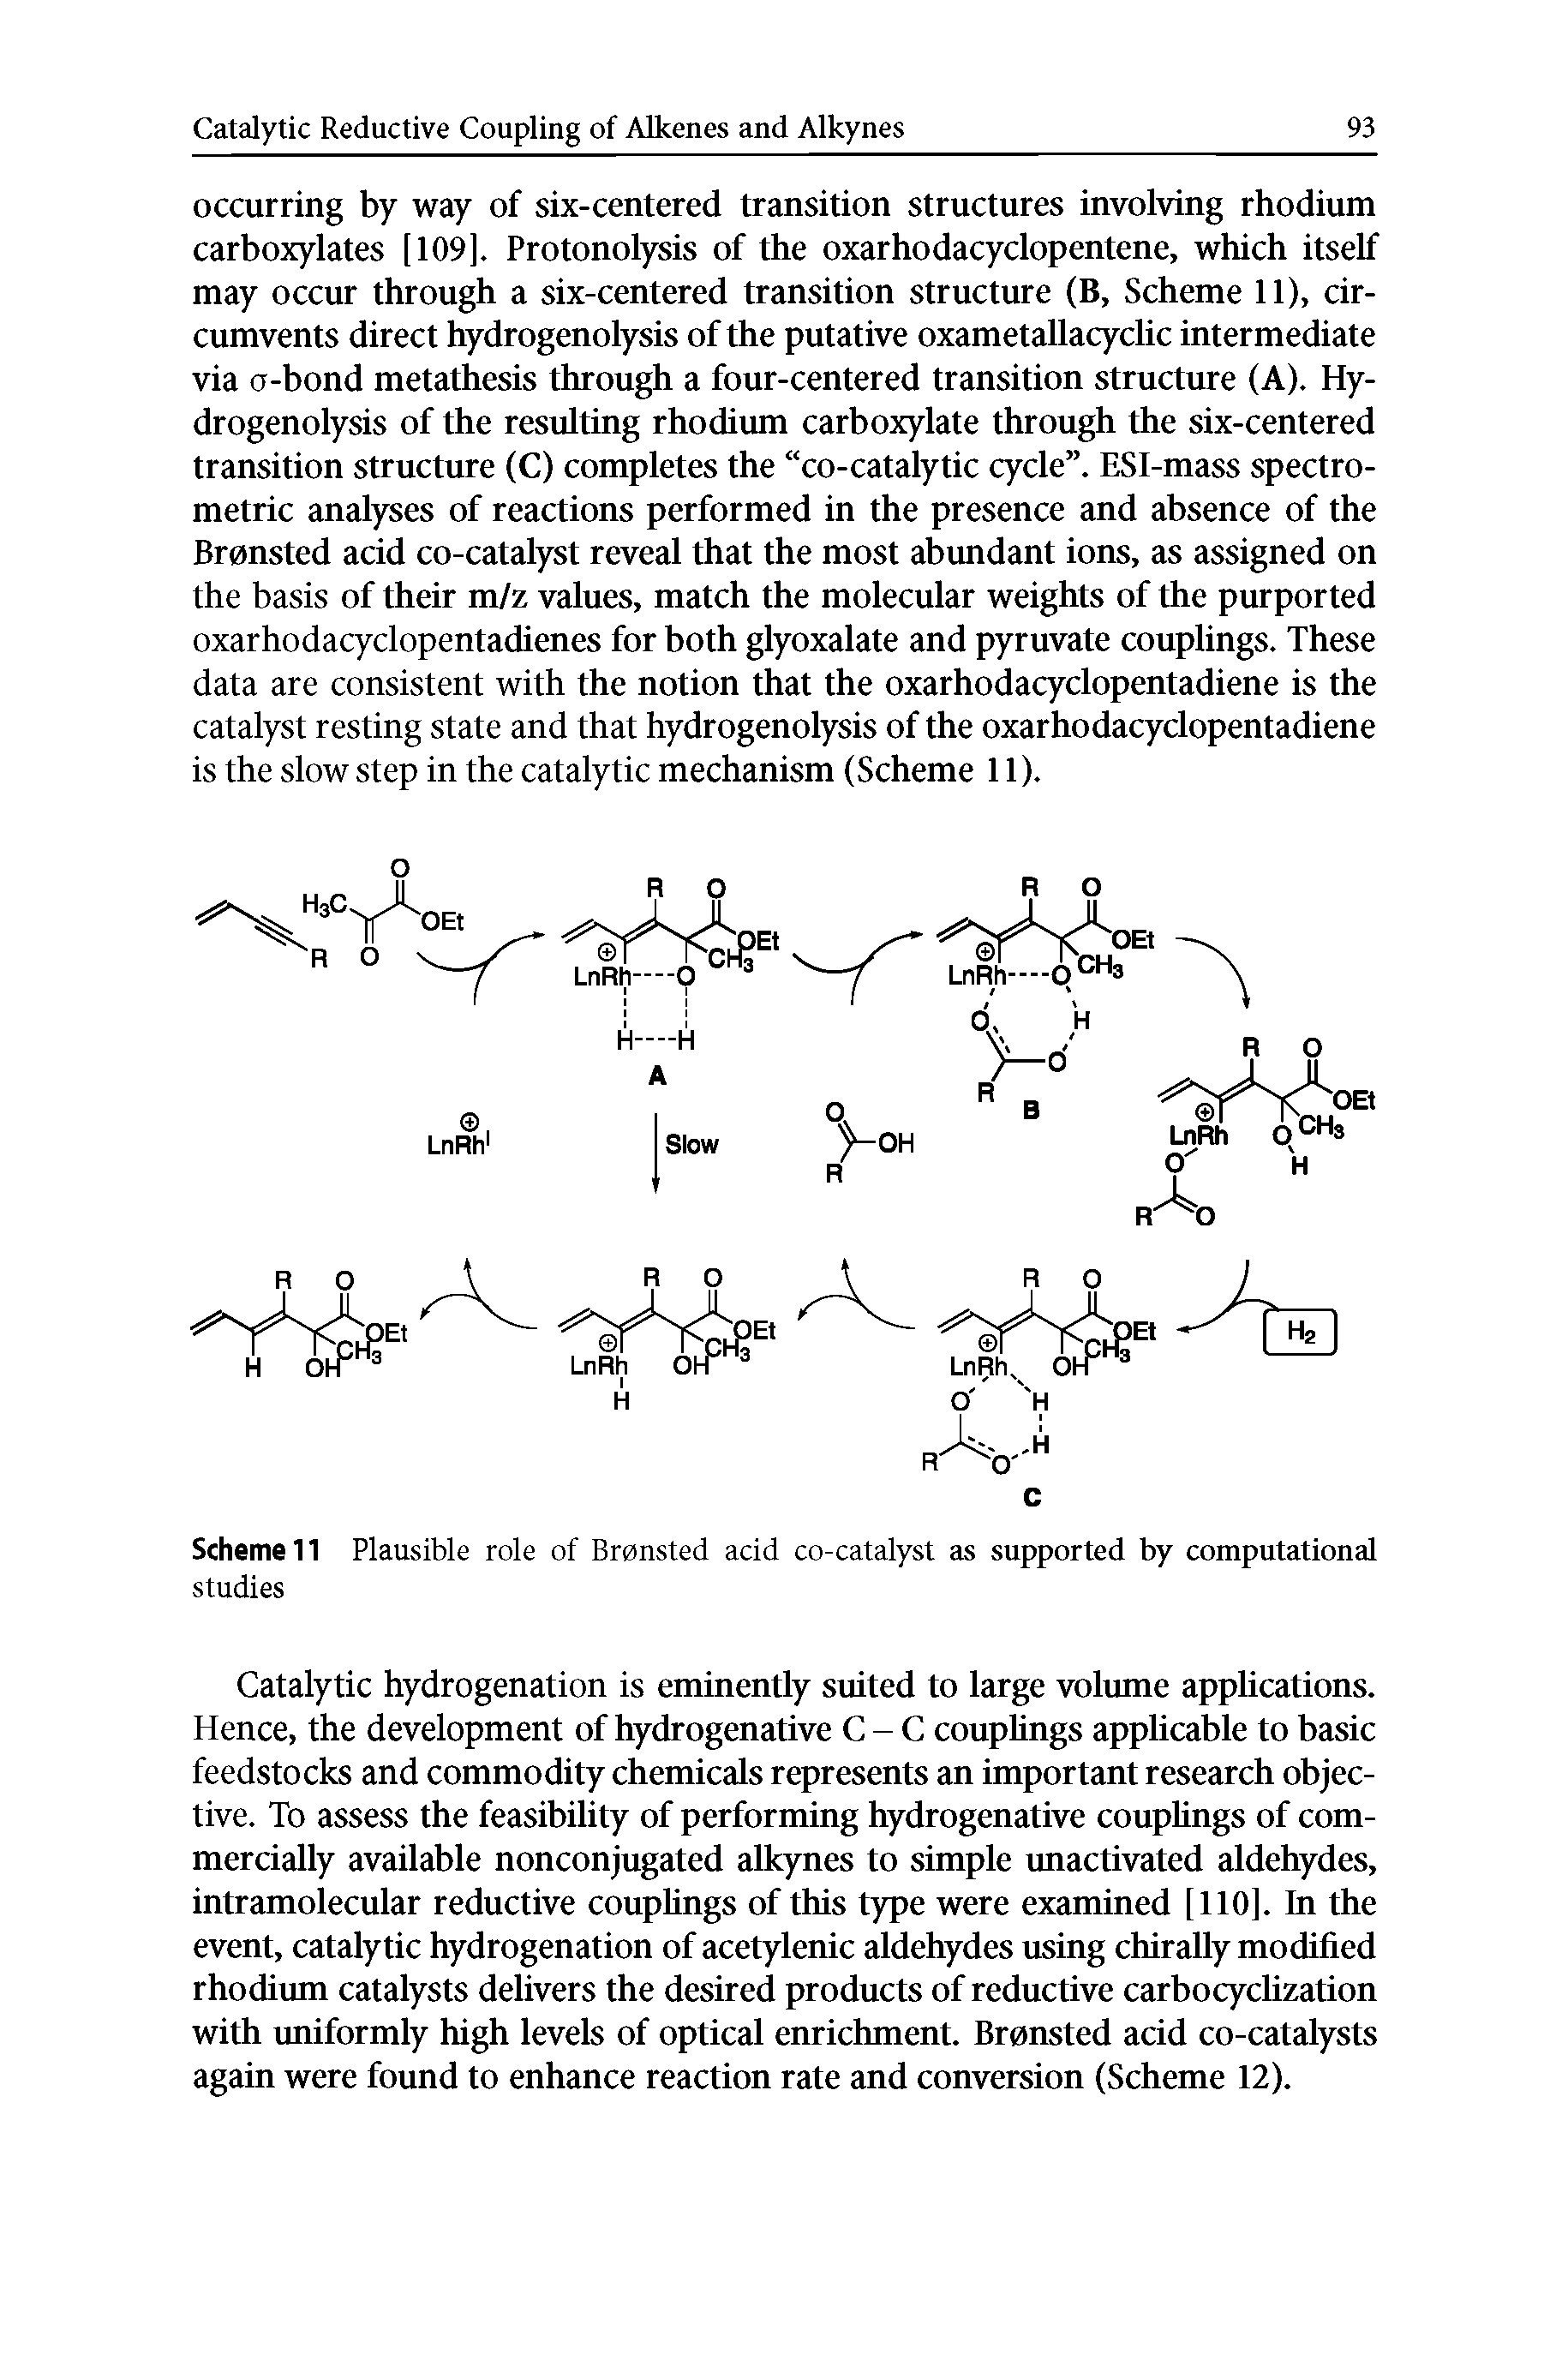 Scheme 11 Plausible role of Bronsted acid co-catalyst as supported by computational studies...